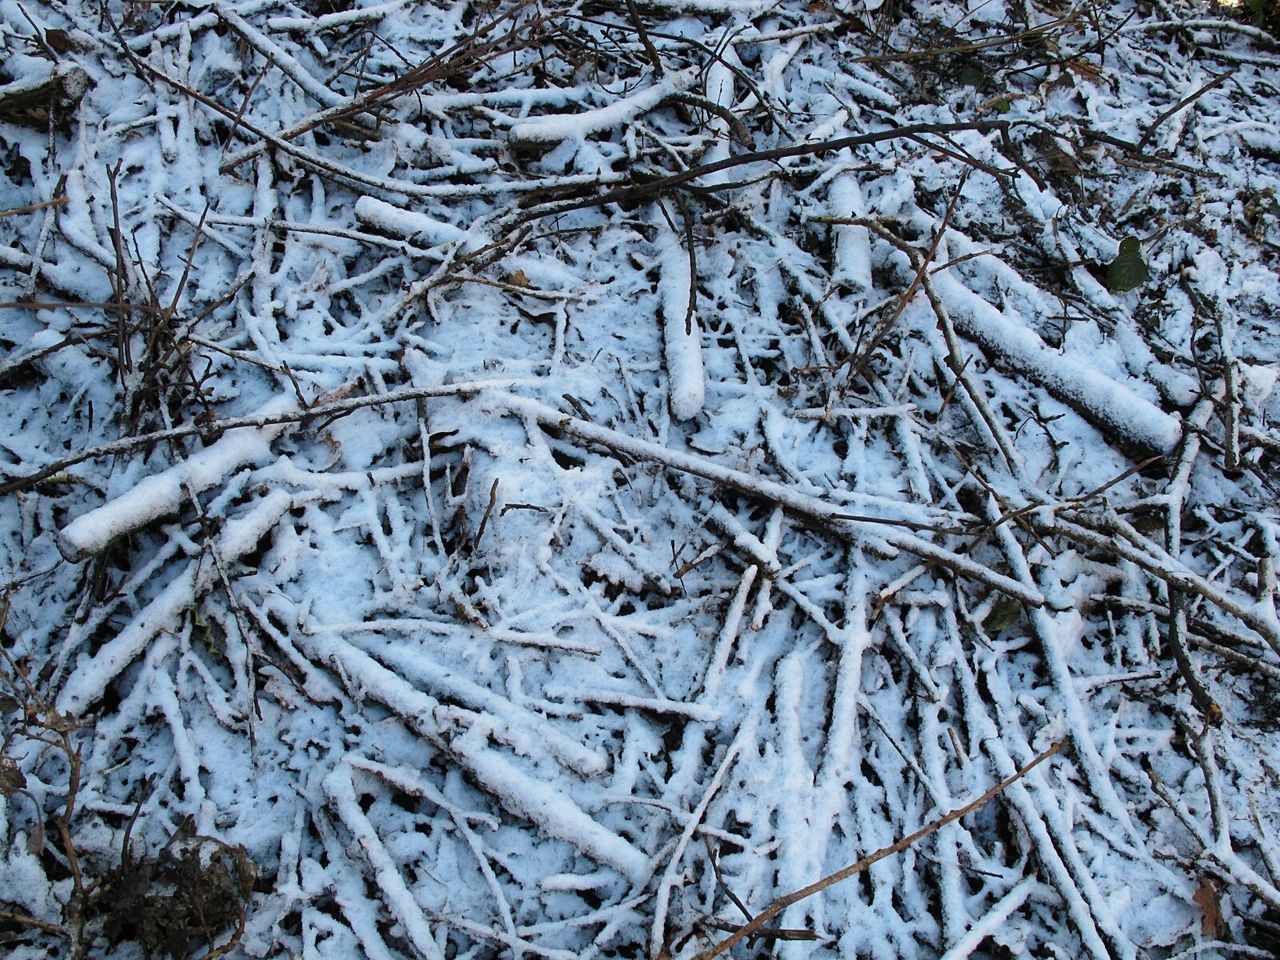 CLOSE-UP OF SNOW COVERED BARE TREES